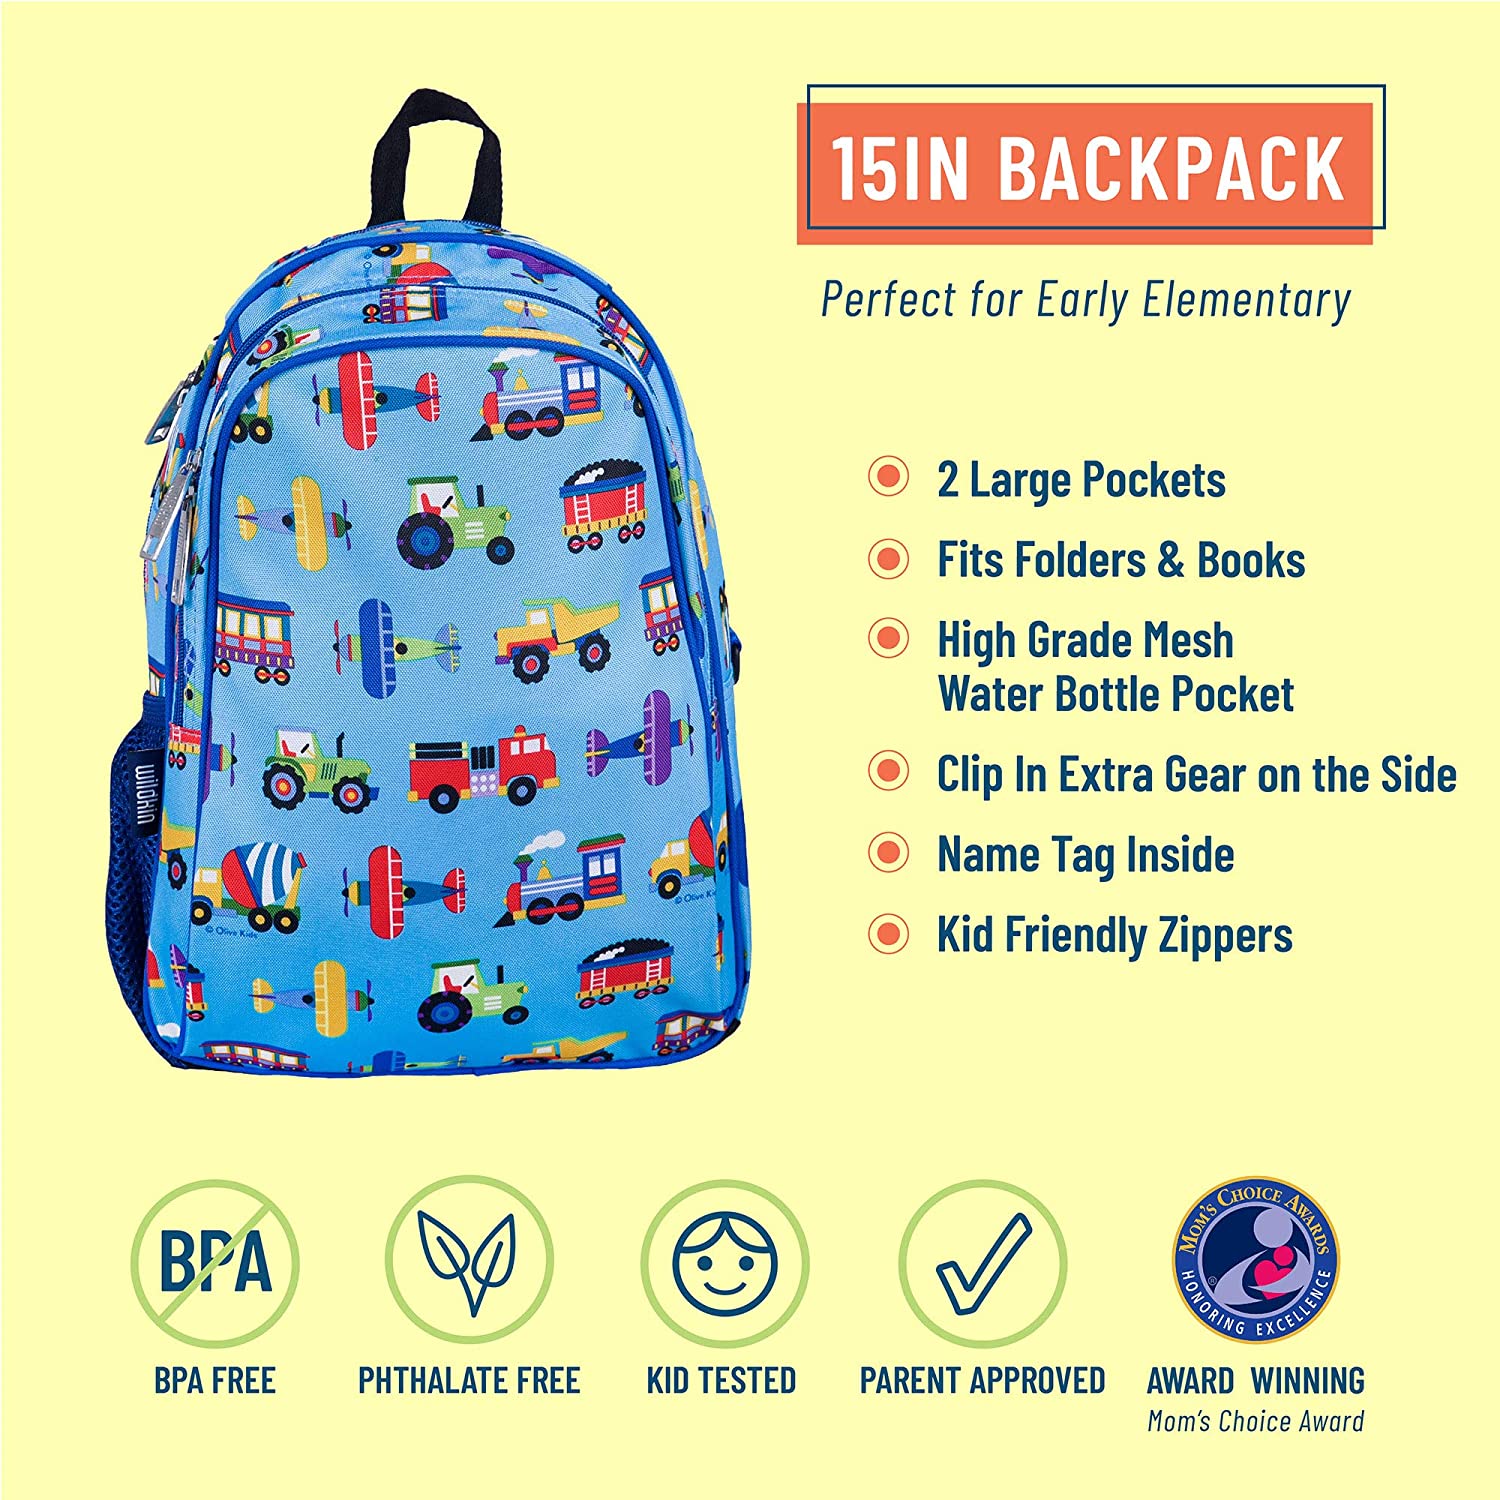 https://discounttoday.net/wp-content/uploads/2022/09/Wildkin-15-Inch-Kids-Backpack-for-Boys-Girls-Perfect-for-Early-Elementary-Backpack-for-Kids-Features-Padded-Back-Adjustable-Strap-Ideal-for-School-Travel-BackpacksTrains-Planes-and-Trucks1.jpg